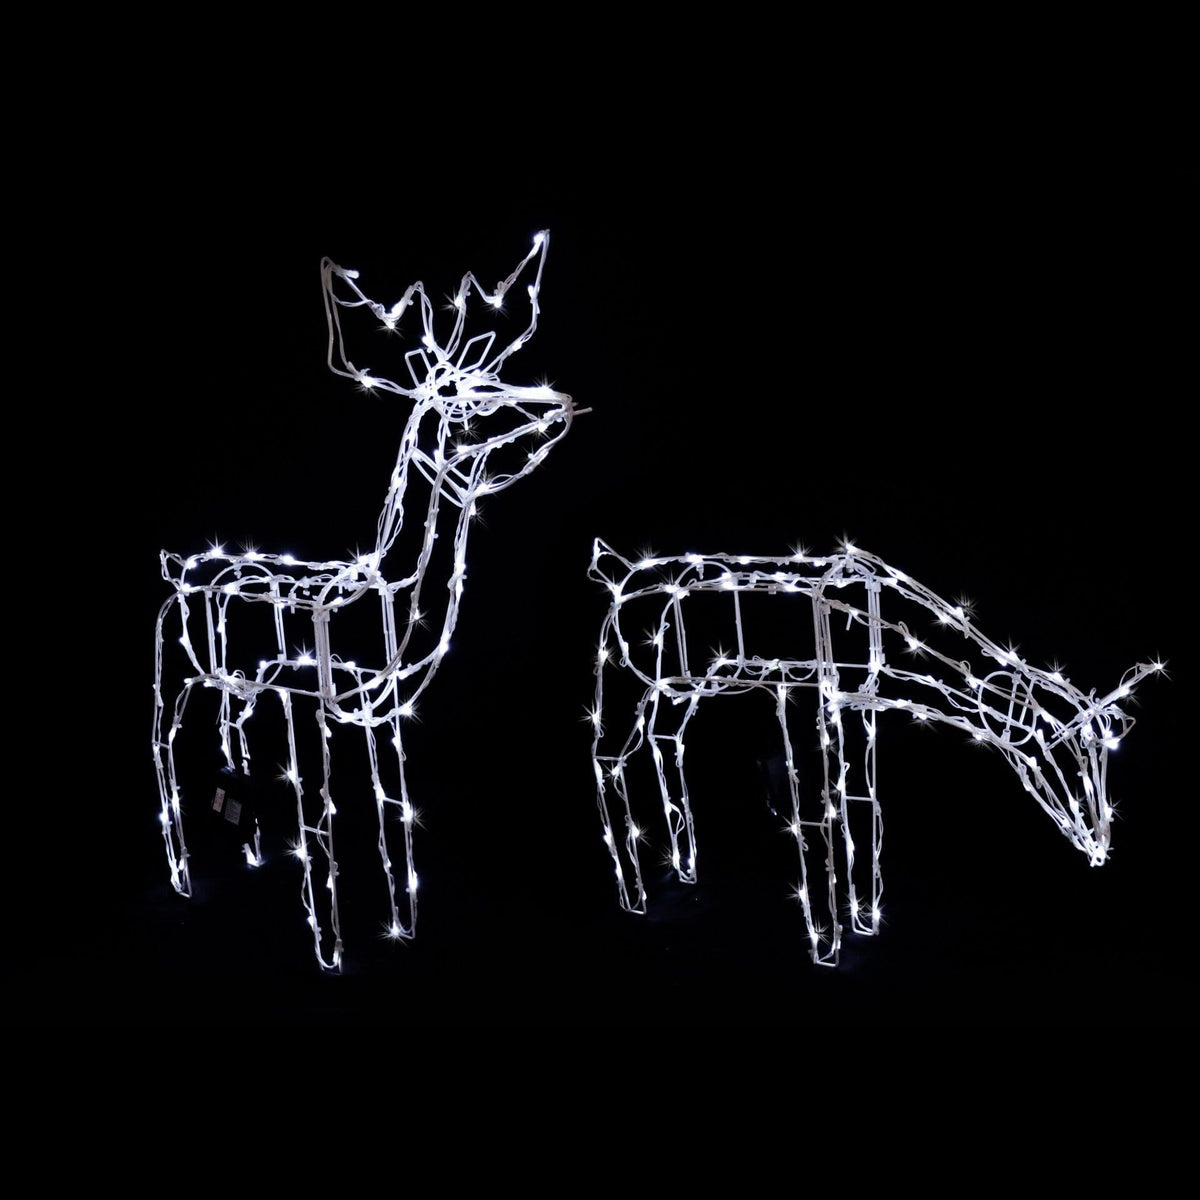 LED Wire Reindeer